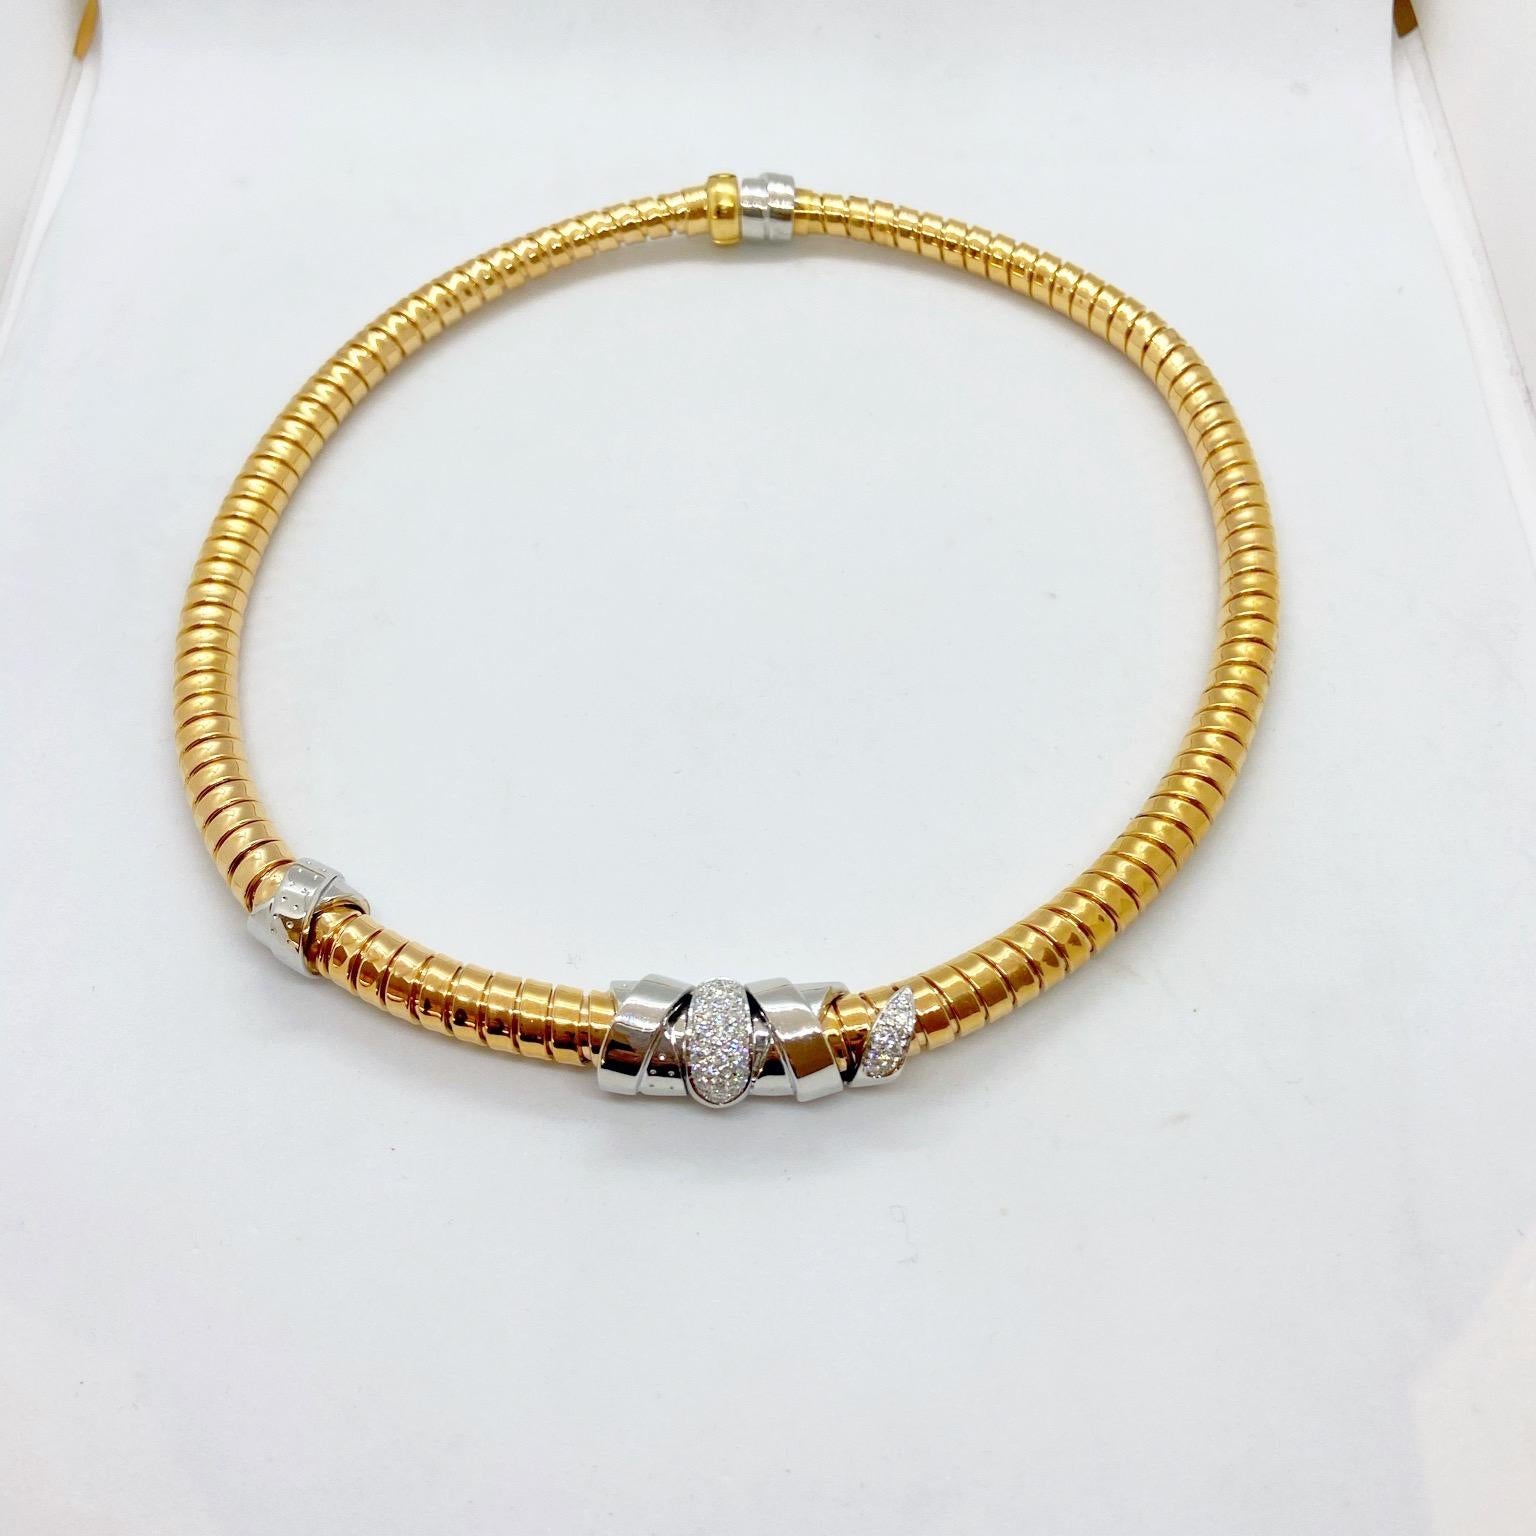 This  18 karat rose gold choker necklace is designed by the world renowned Italian company La Nouvelle Bague. They are known for their exquisite craftsmanship, marrying the classic with the modern.
The choker is from the Tubogas collection. The